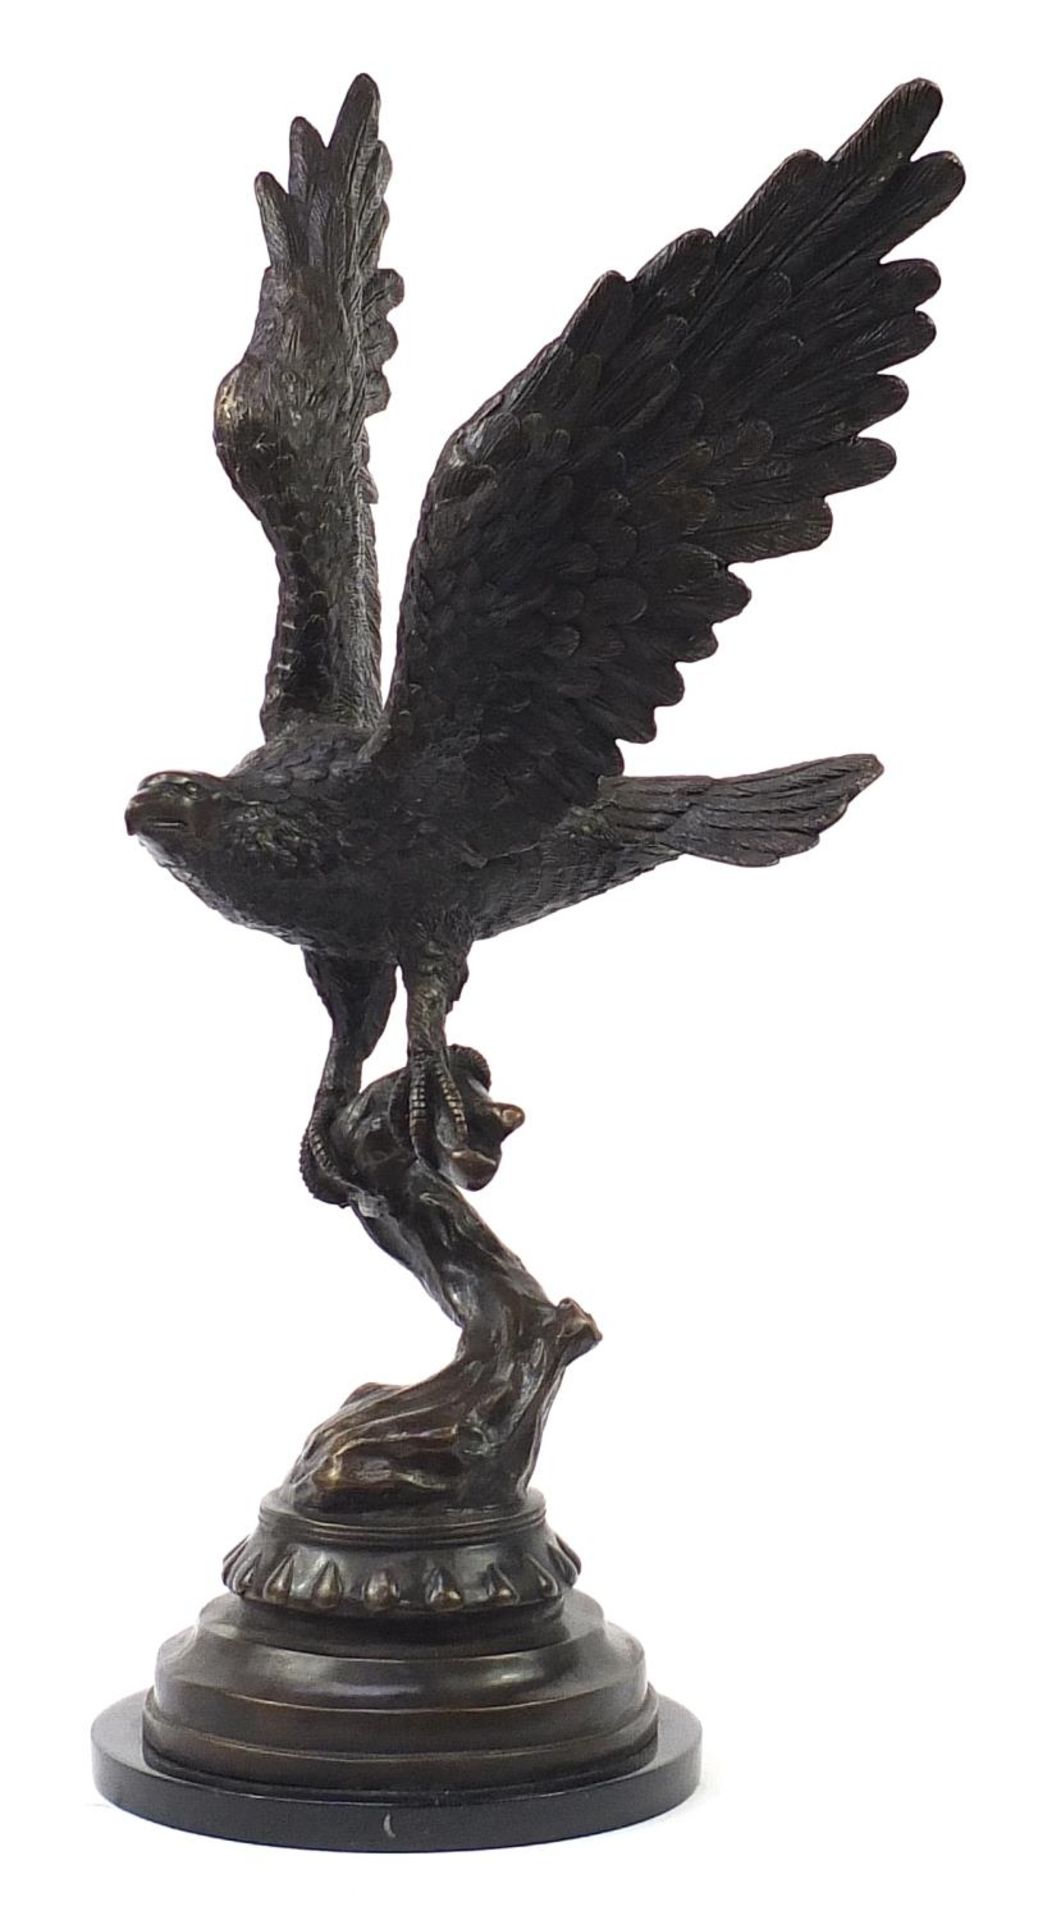 Floor standing patinated bronze study of an eagle with outspread wings raised on a circular black